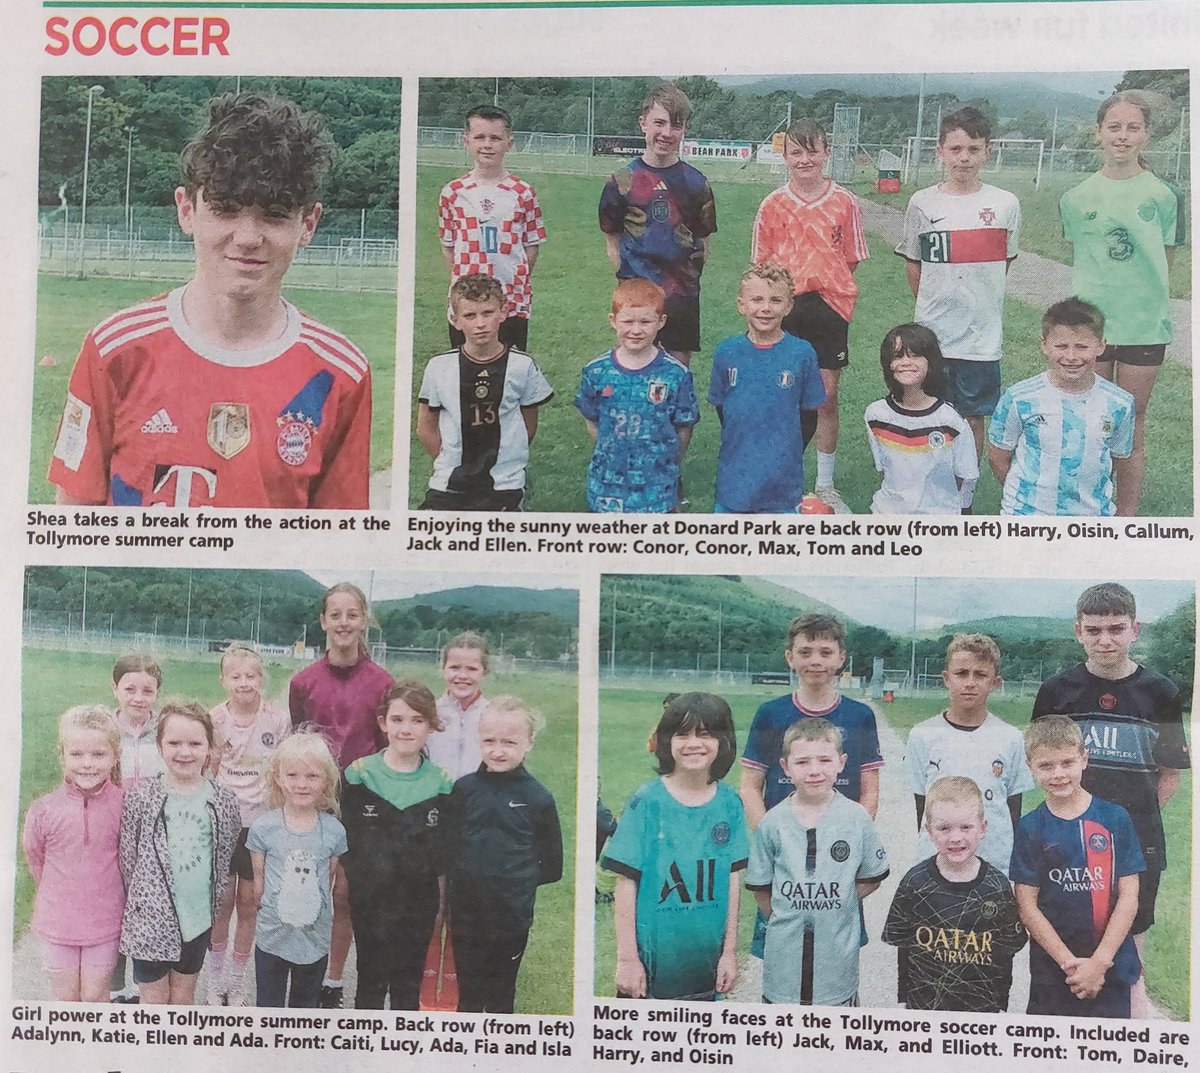 Thanks @DownRec for the coverage of our first soccer fun week. Our 2nd fun week starts on Monday at Donard Park. Registration from 9:30am and costs just £40 for the full week